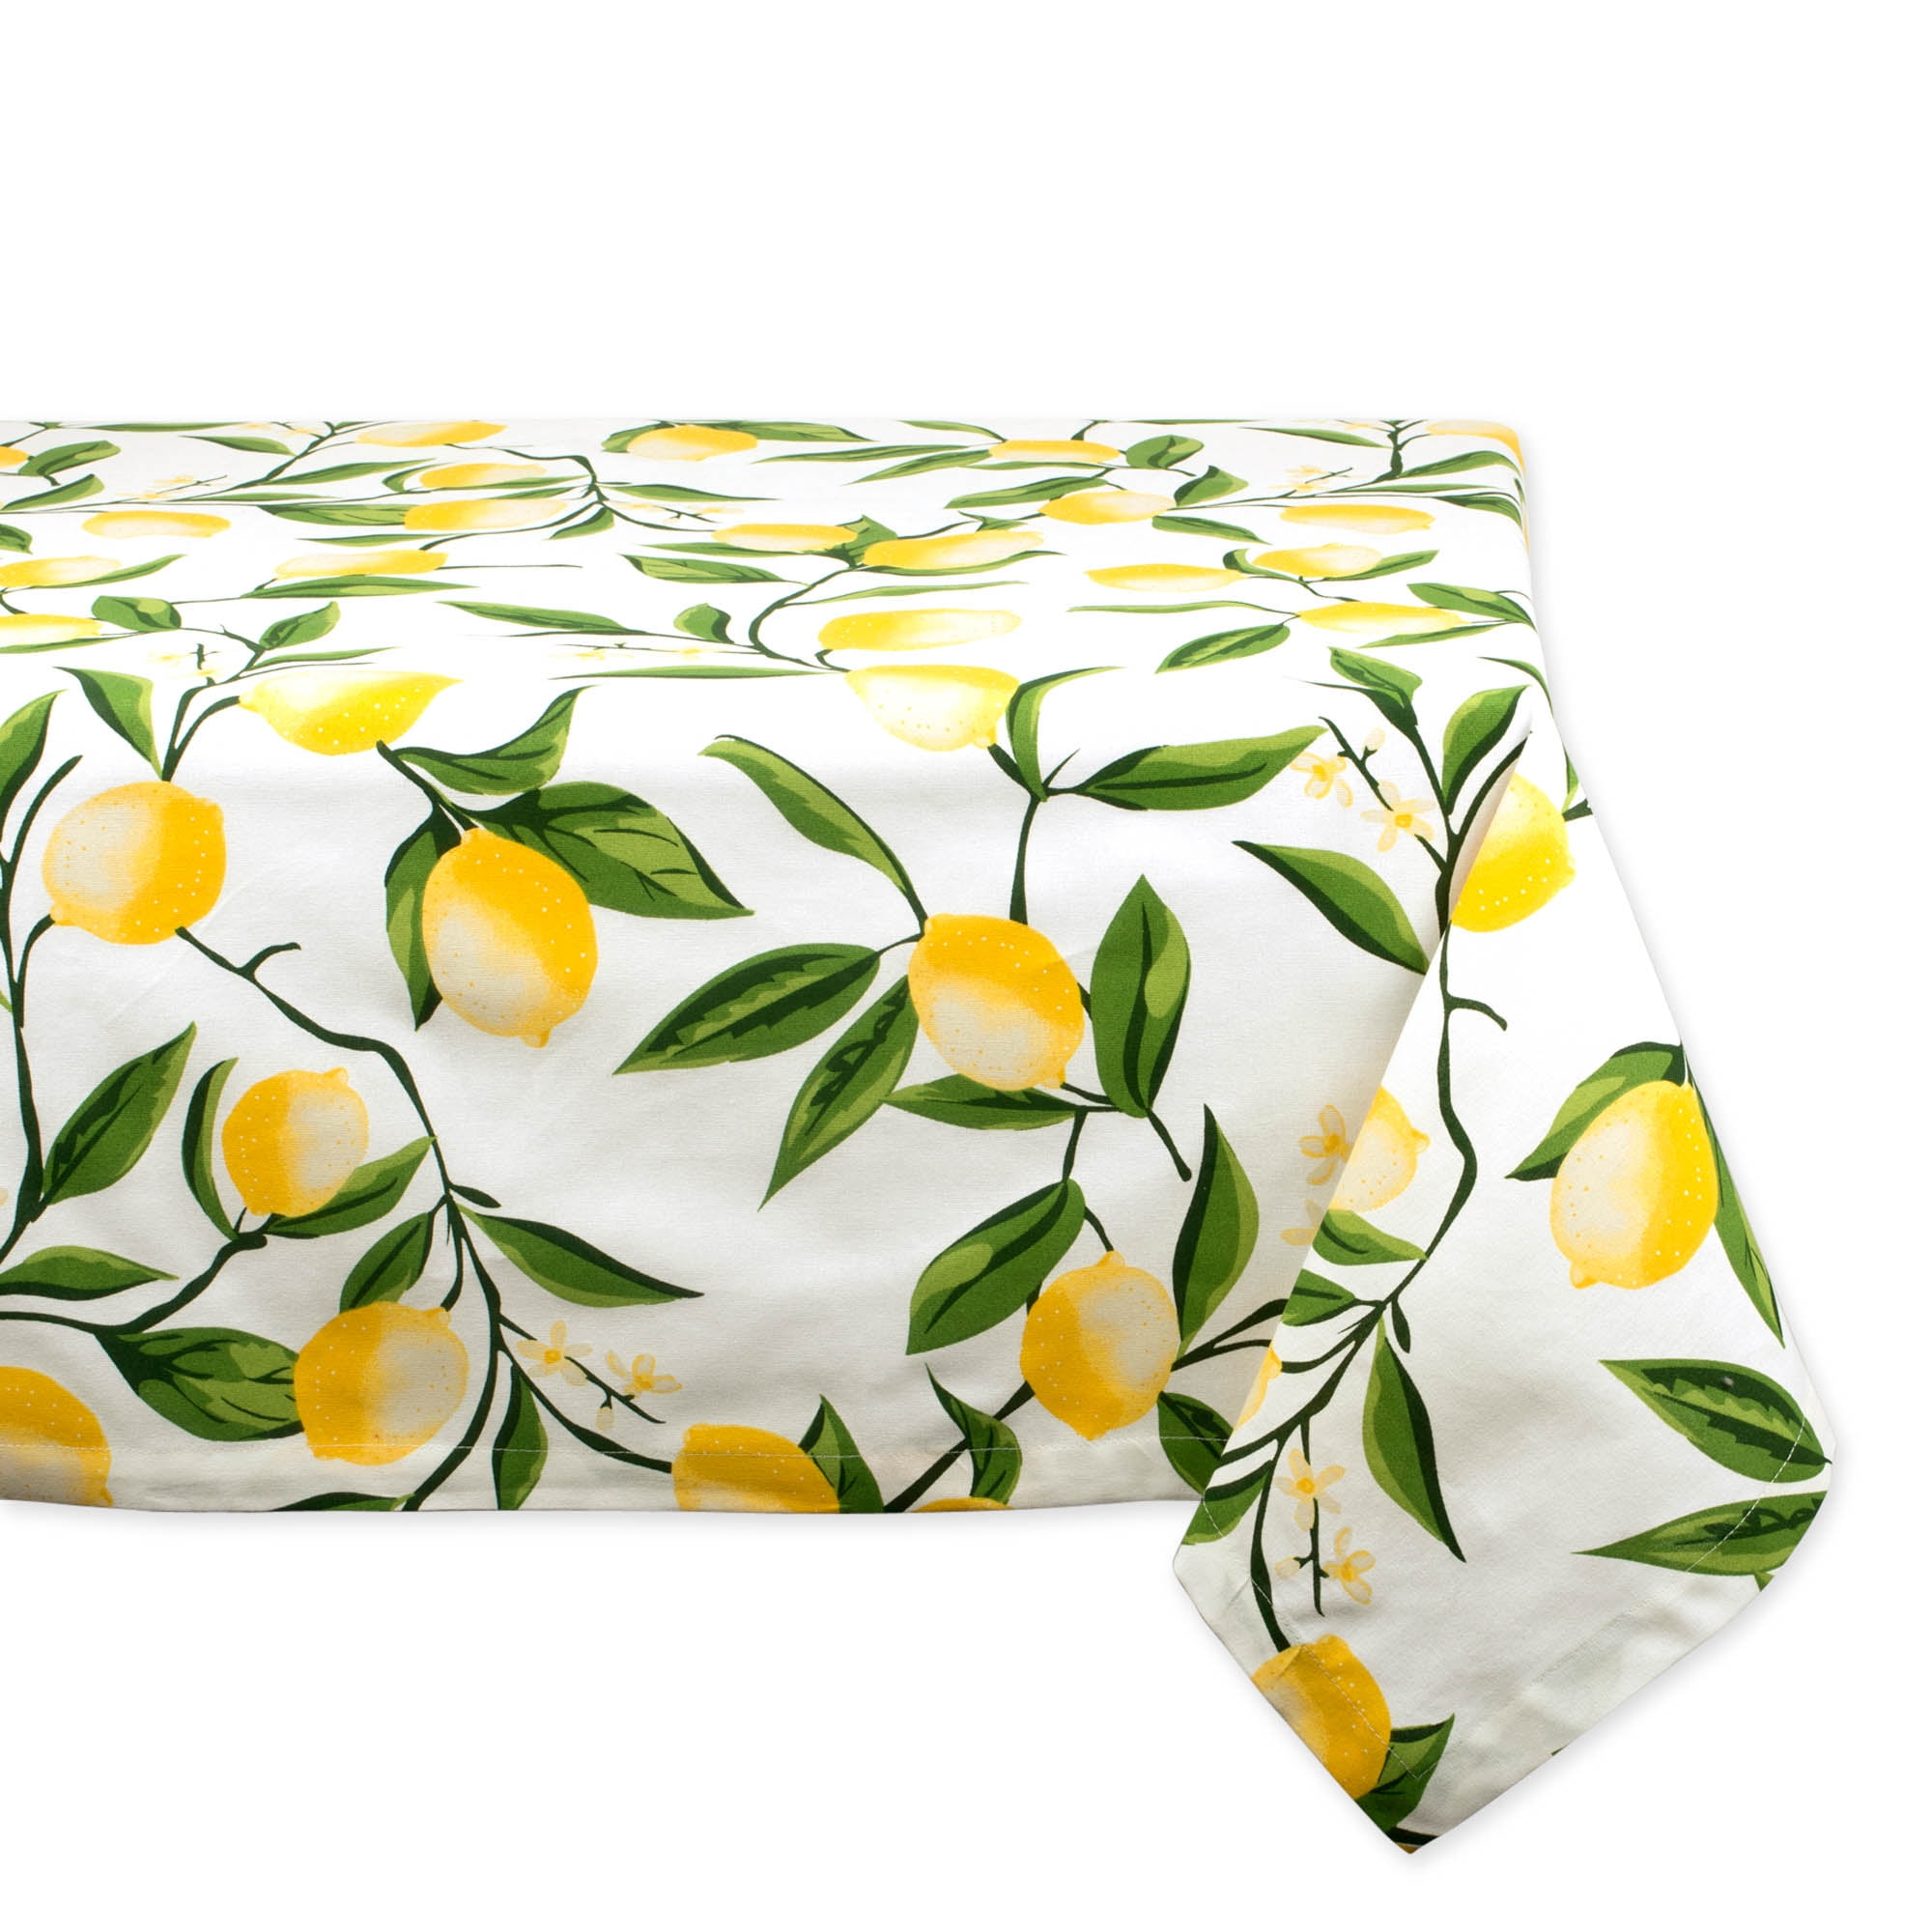 Summer Fresh Tablecloth with Beautiful Lemon Pattern in many sizes 